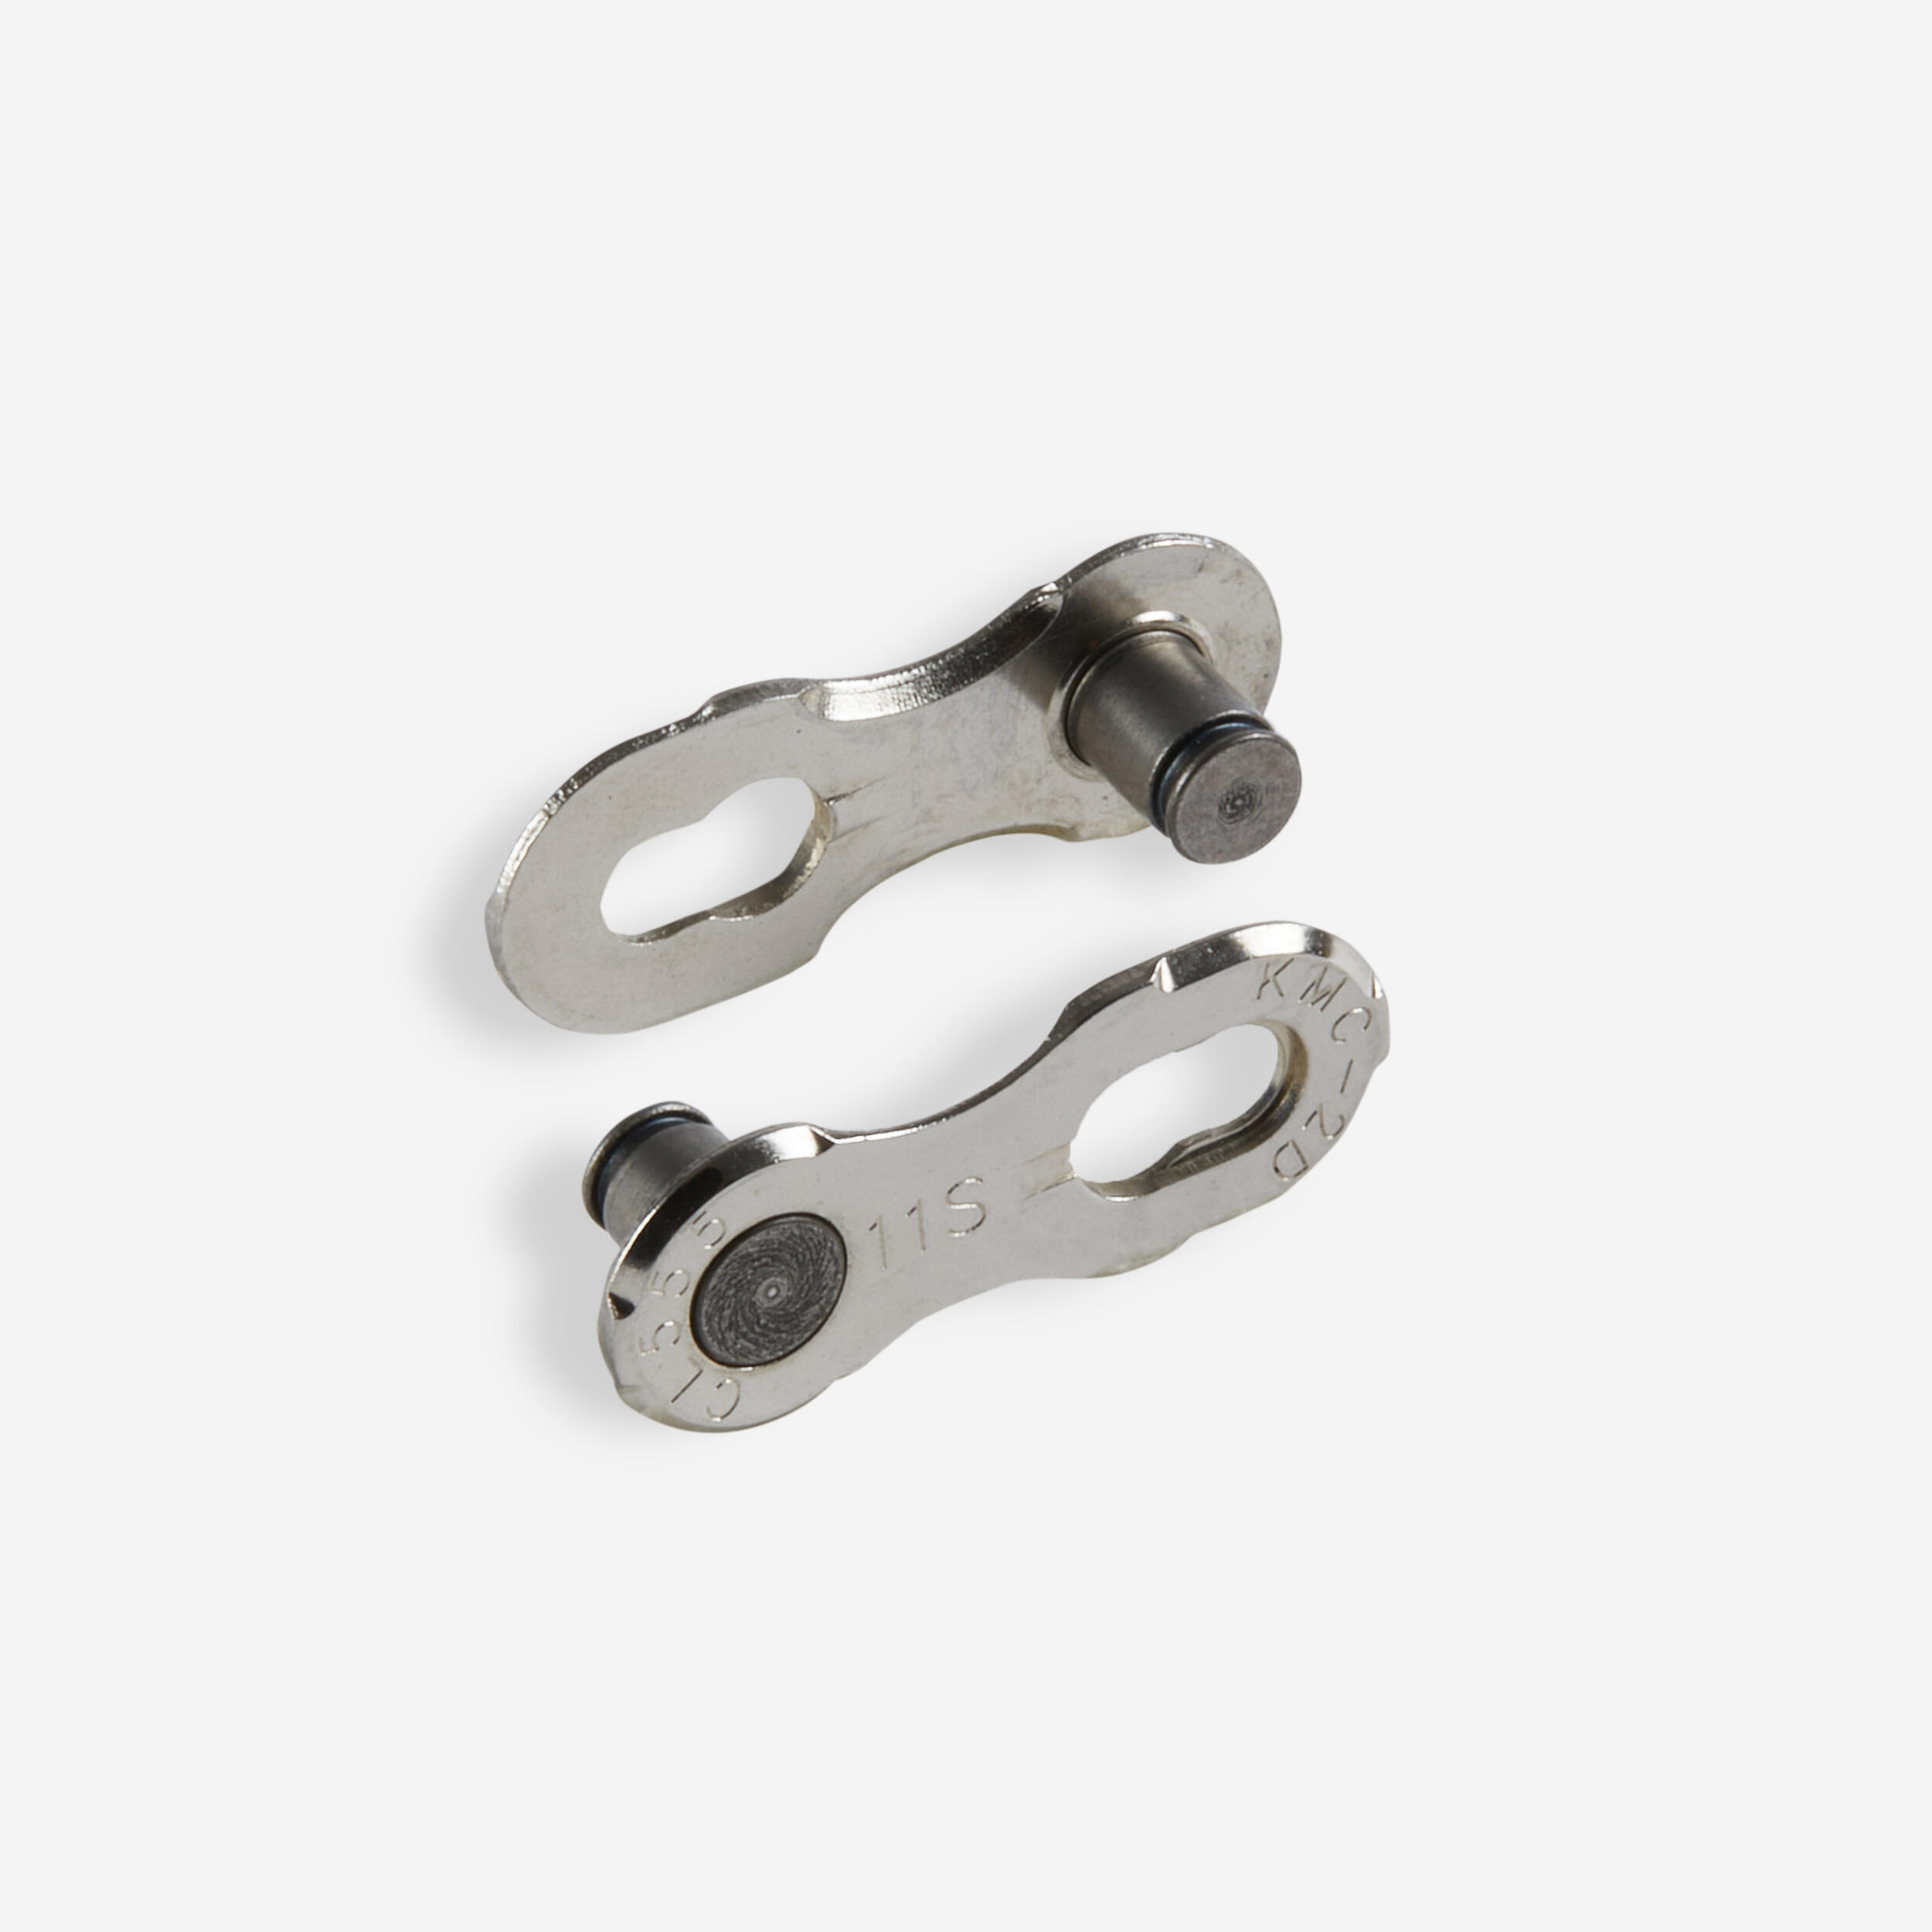 11-Speed Quick Chain Links - Twin Pack - DECATHLON